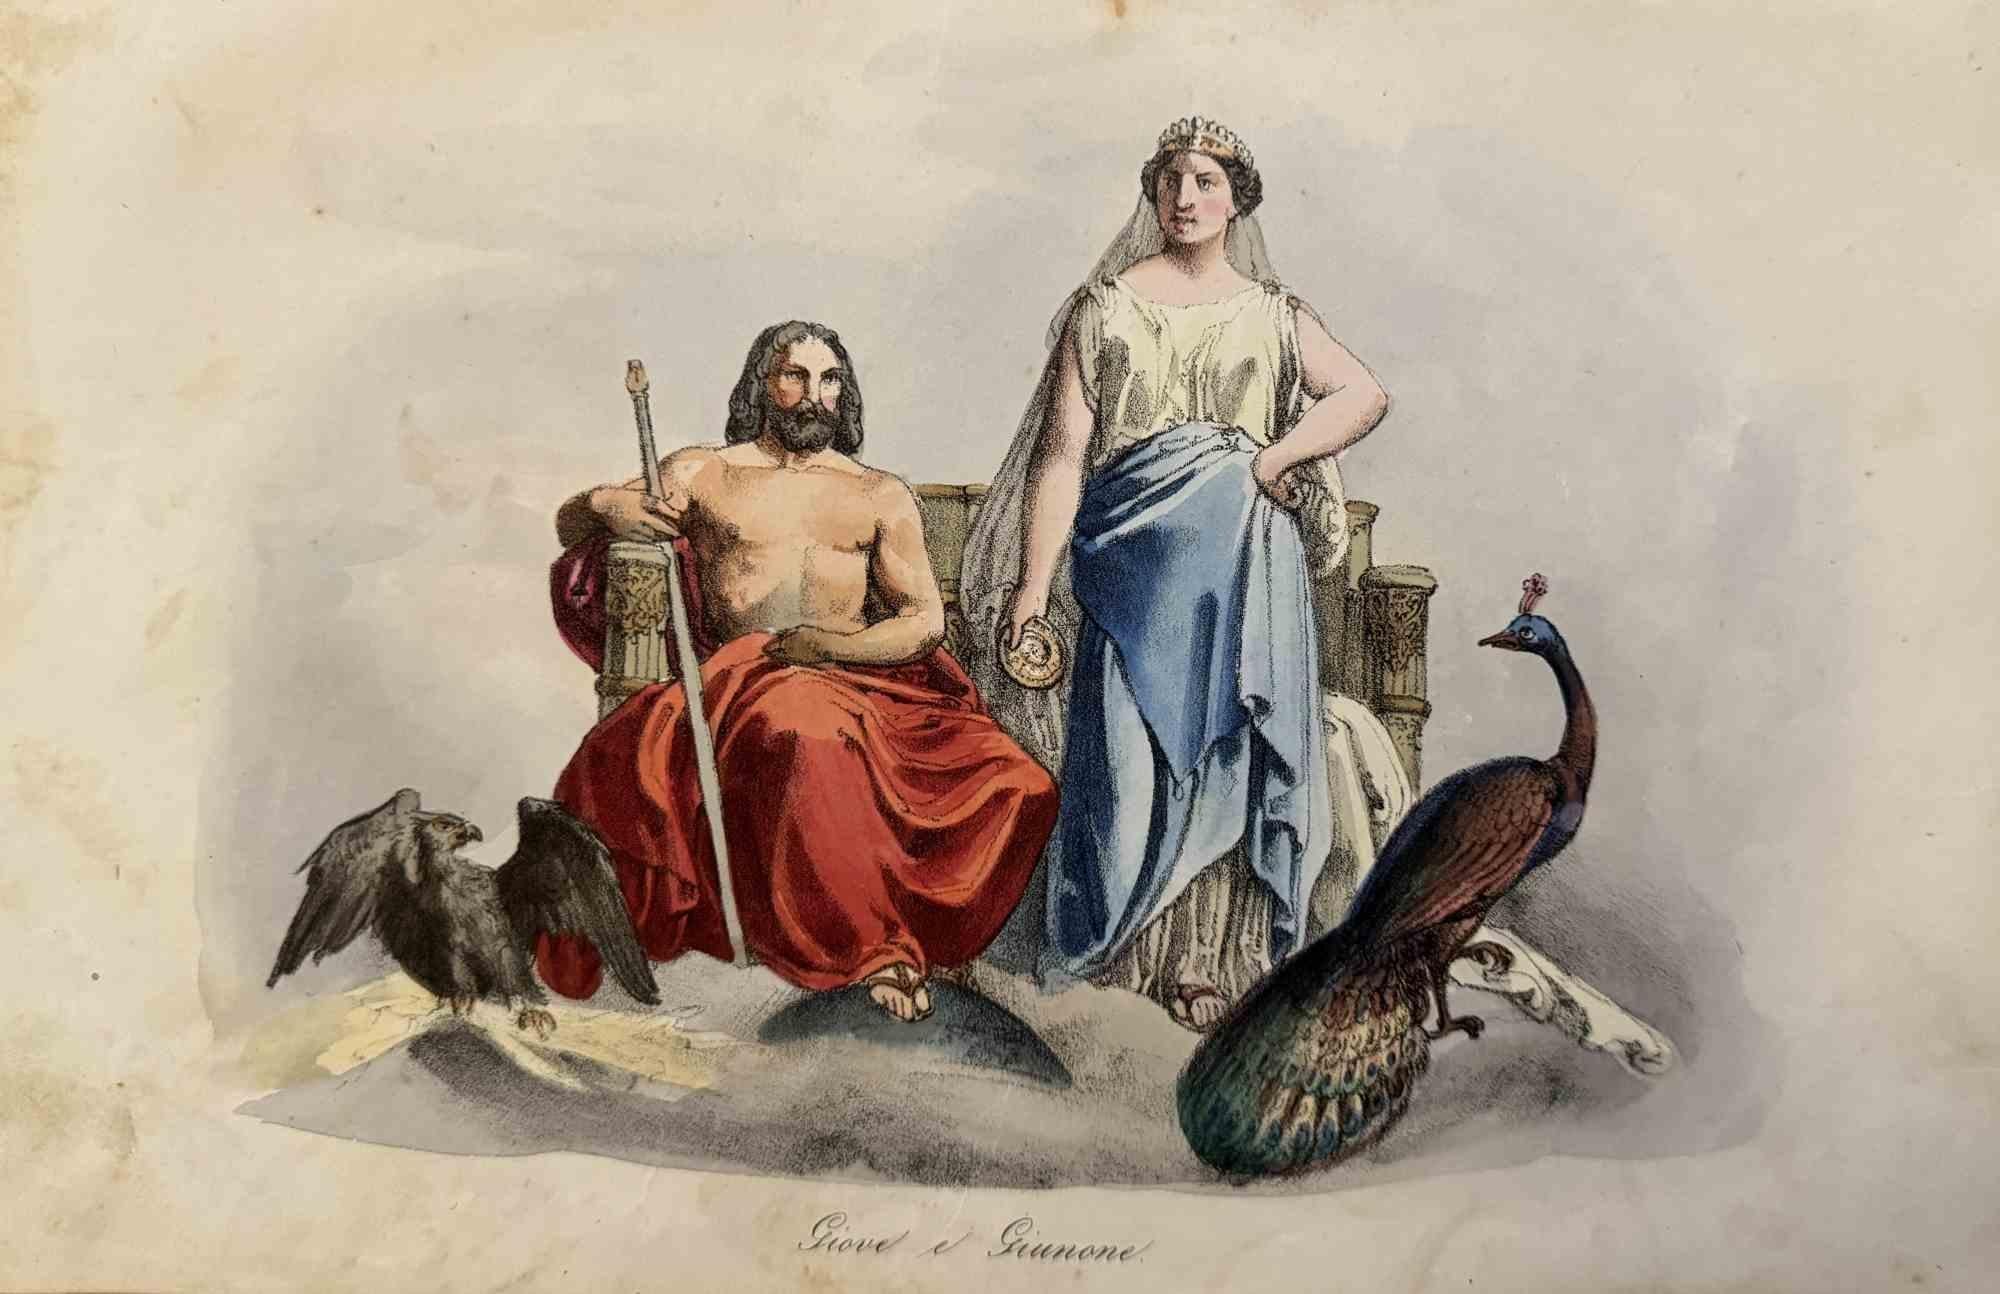 Various Artists Figurative Print - Uses and Customs - Jupiter and Juno - Lithograph - 1862